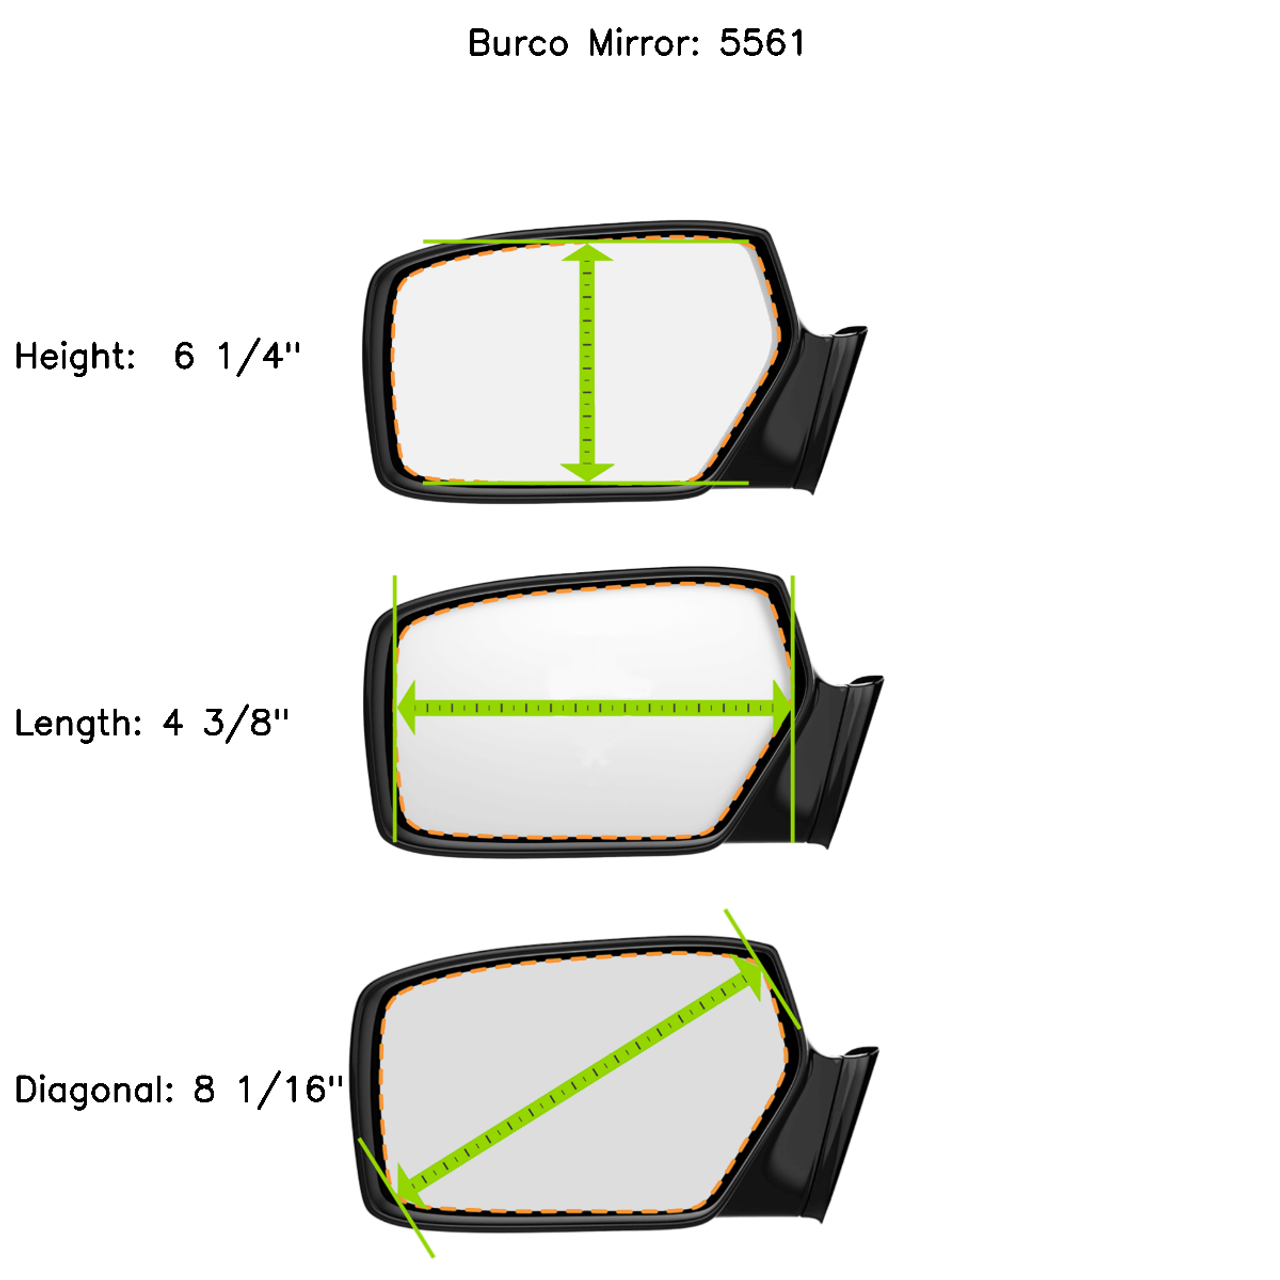 14-15 BMW 228i, 328i, 12-15 BMW 320i, 13-15 335i, 14-15 4 Series Right Passenger Convex Mirror Glass Lens w/Adhesive USA 2 OptionsFits Models with turn signal in housing, Models without Auto Dimming Feature. See details